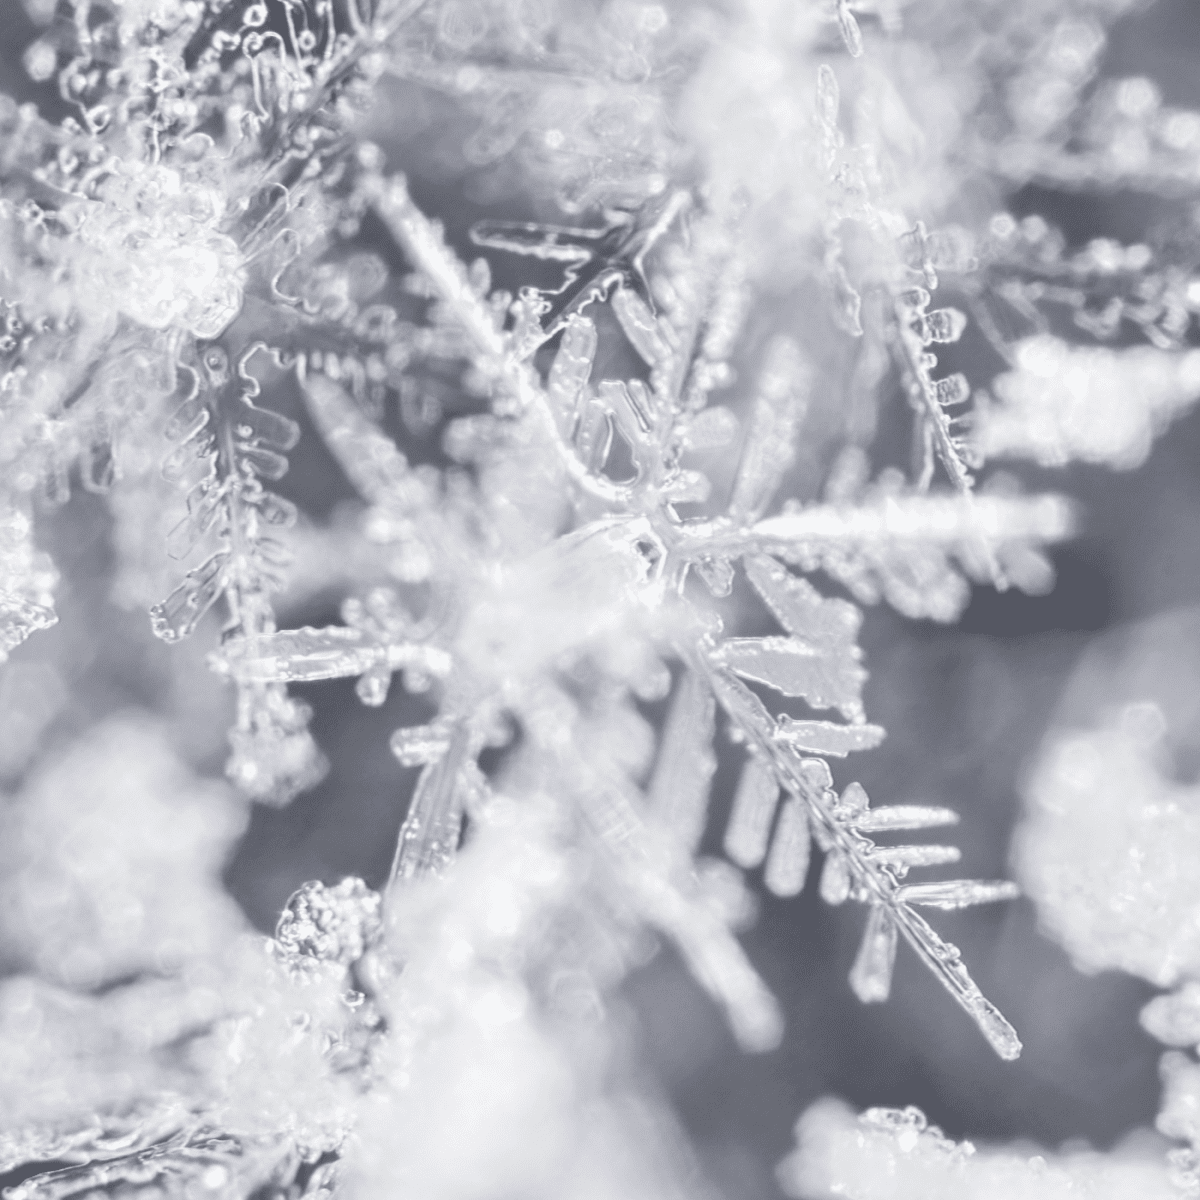 The science and poetry of snowflakes